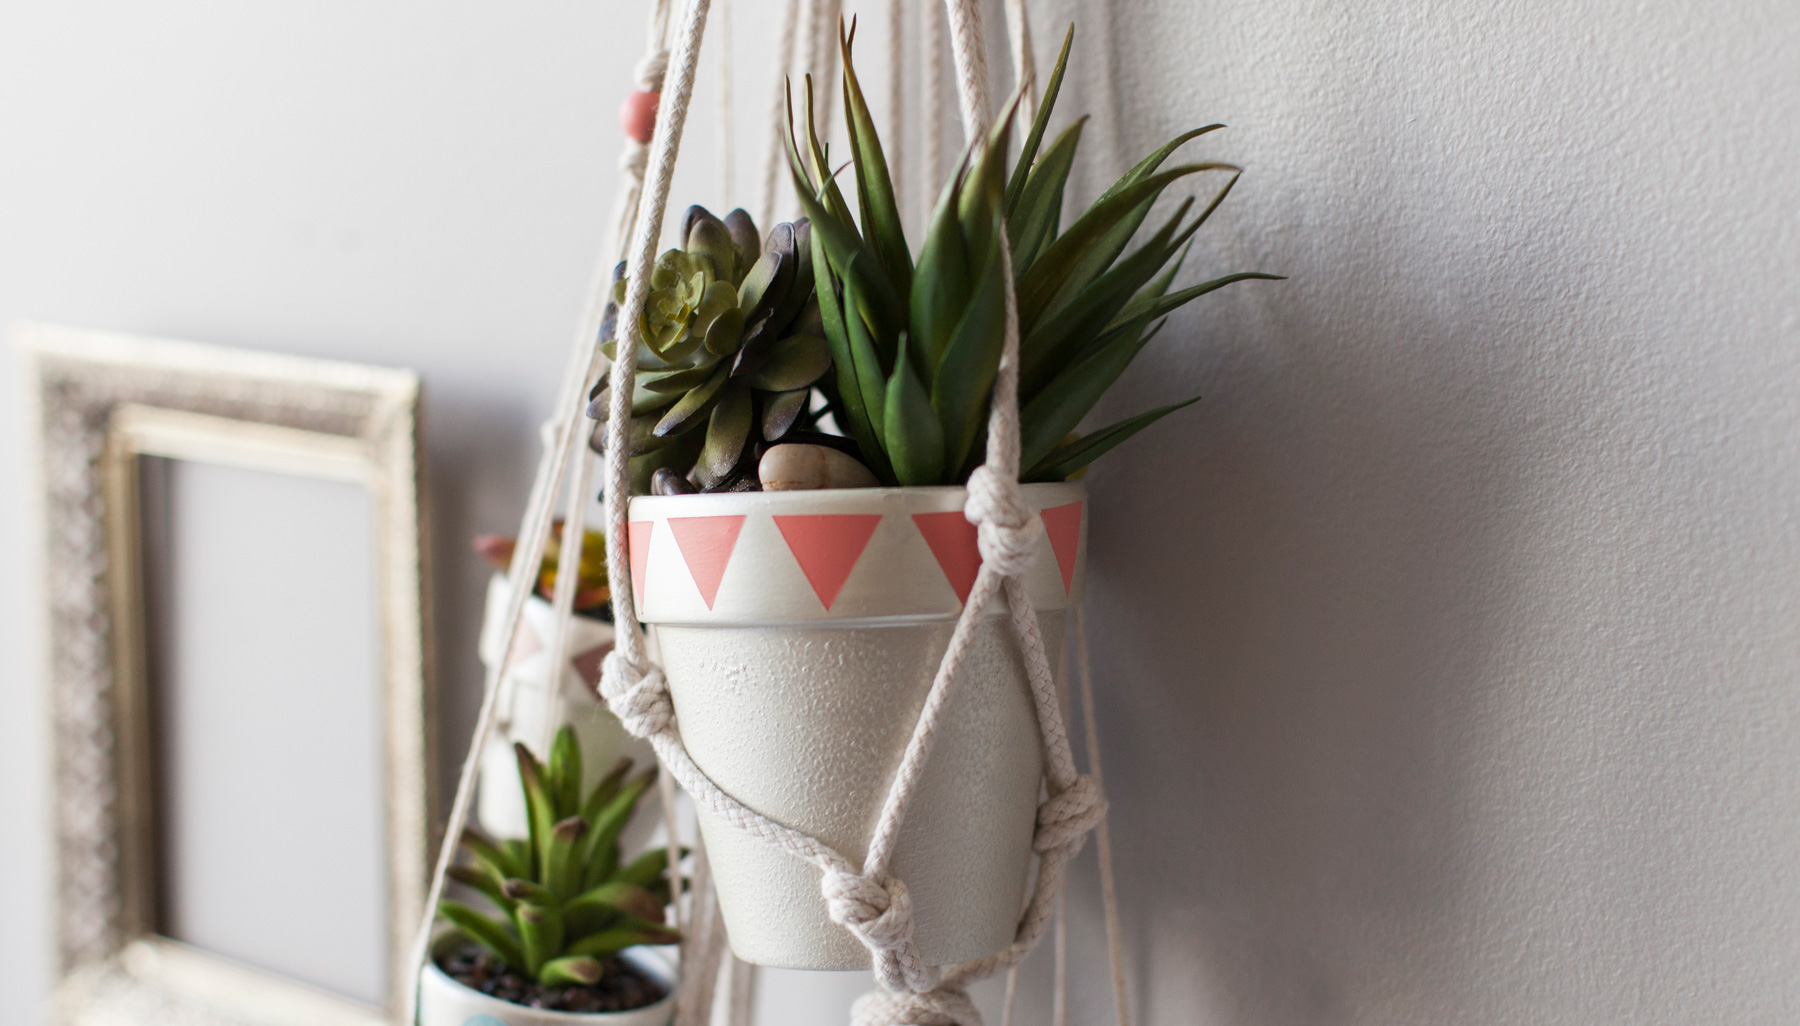 custom indoor planter for hanging wall plant against wall